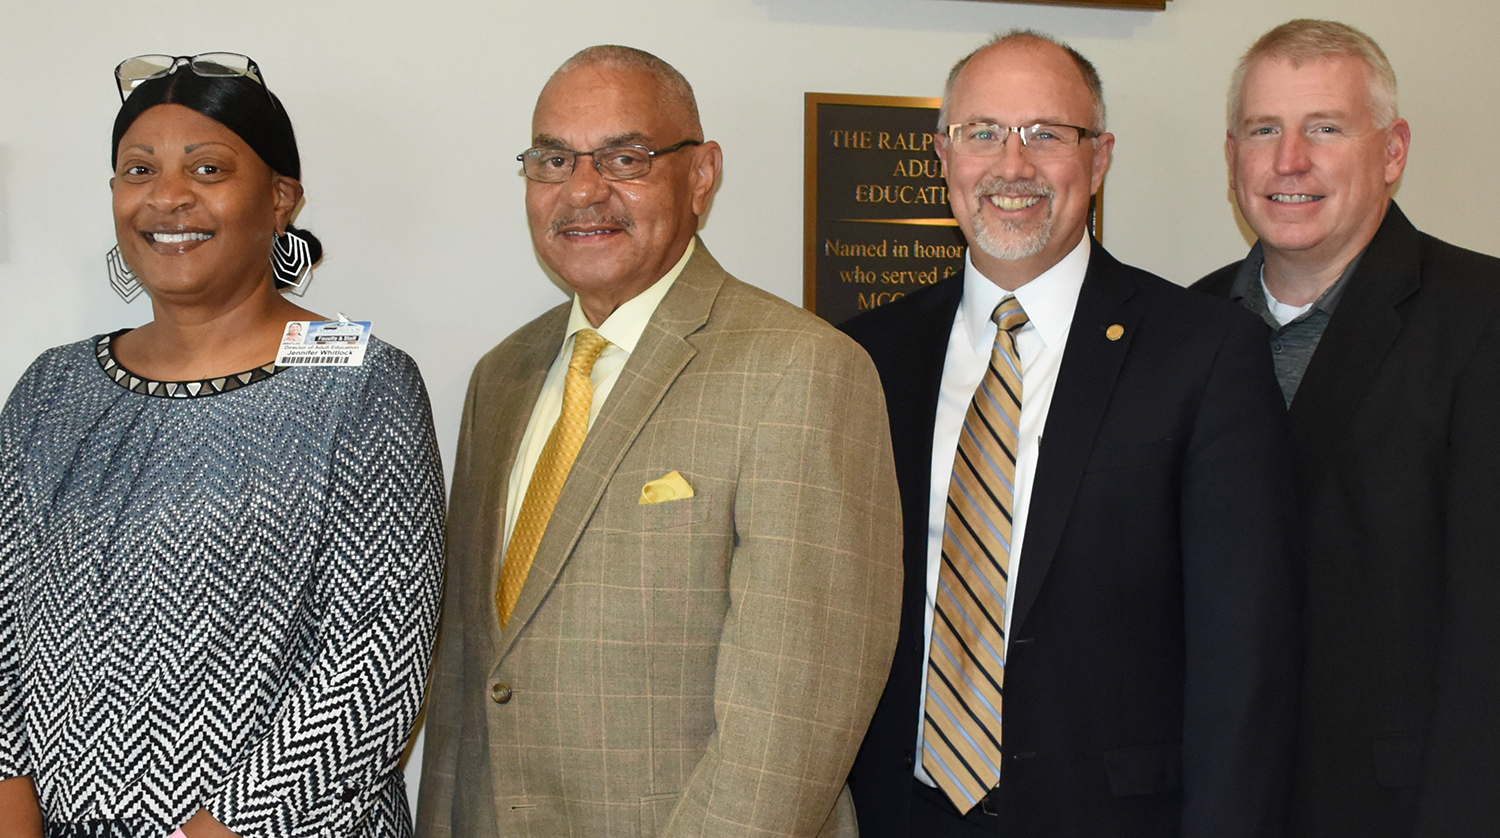 Posing for a photo opportunity are Jennifer Whitlock, MCC director of adult education, Meridian Mayor Jimmie Smith, MCC President Dr. Thomas Huebner, and Joseph Knight, MCC vice president for workforce solutions. 